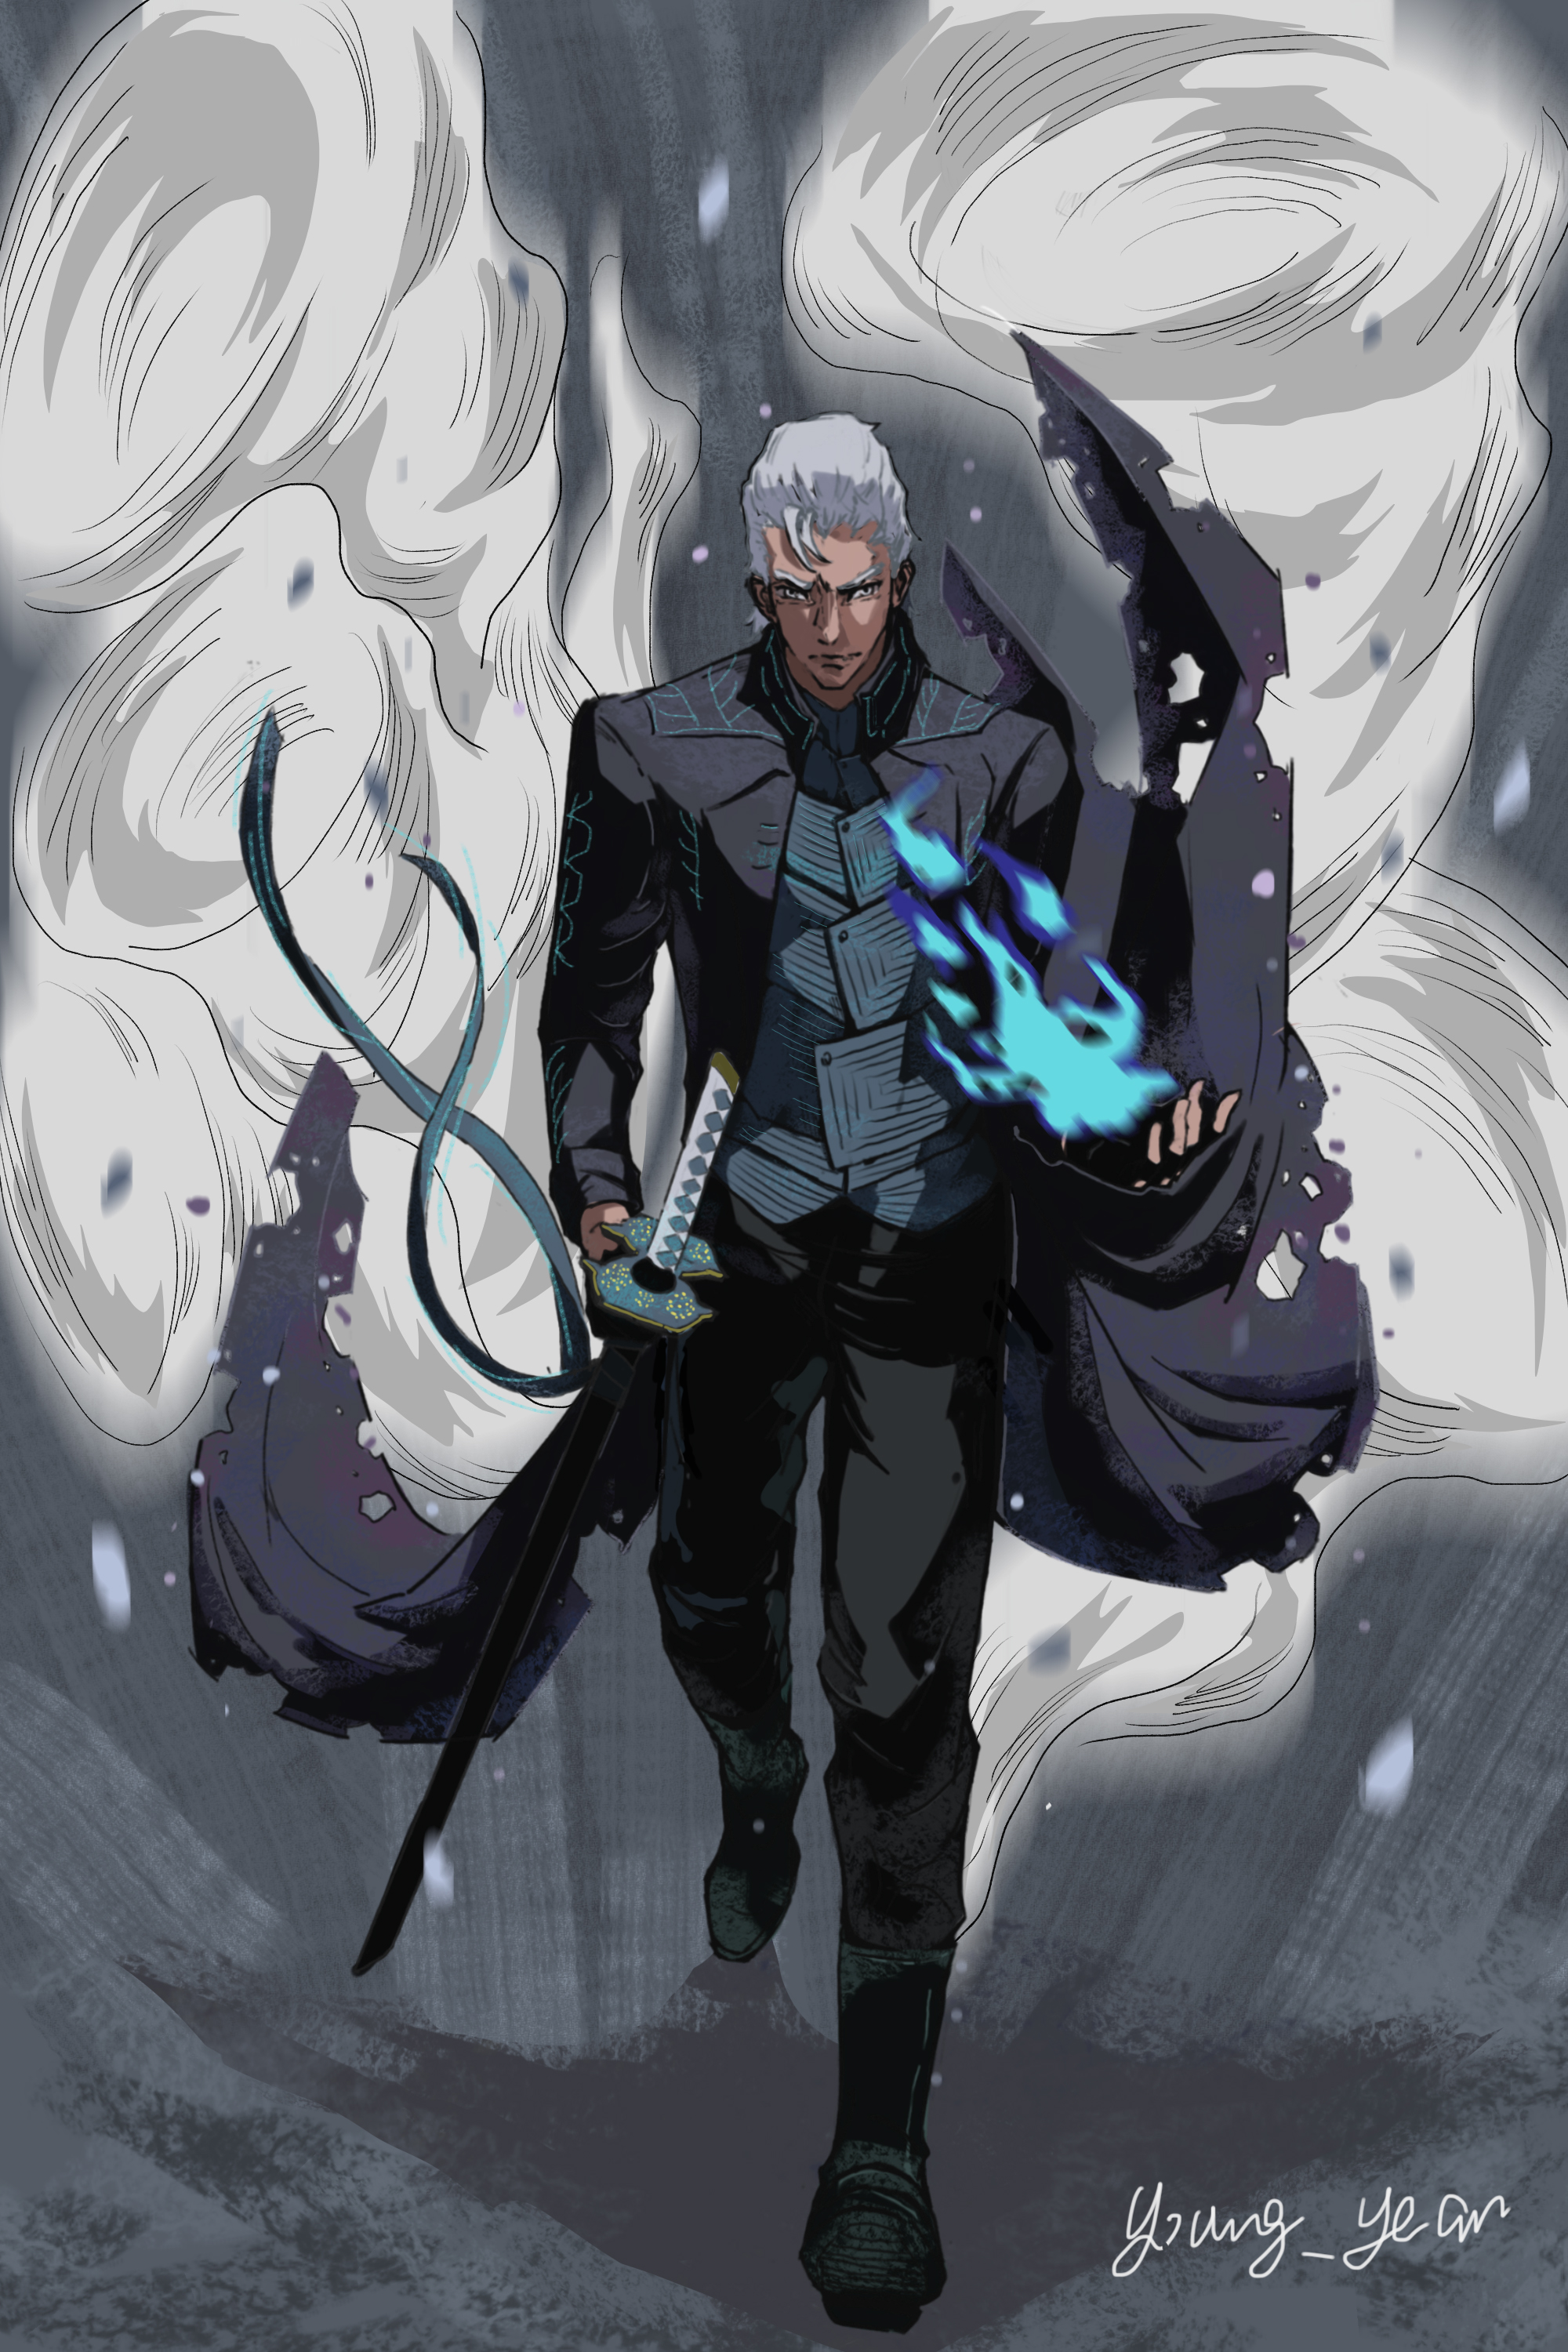 ❕❗❕❗ I AM THE STORM THAT IS APPROACHING ❕❗❕❗ (DMC5 Bird